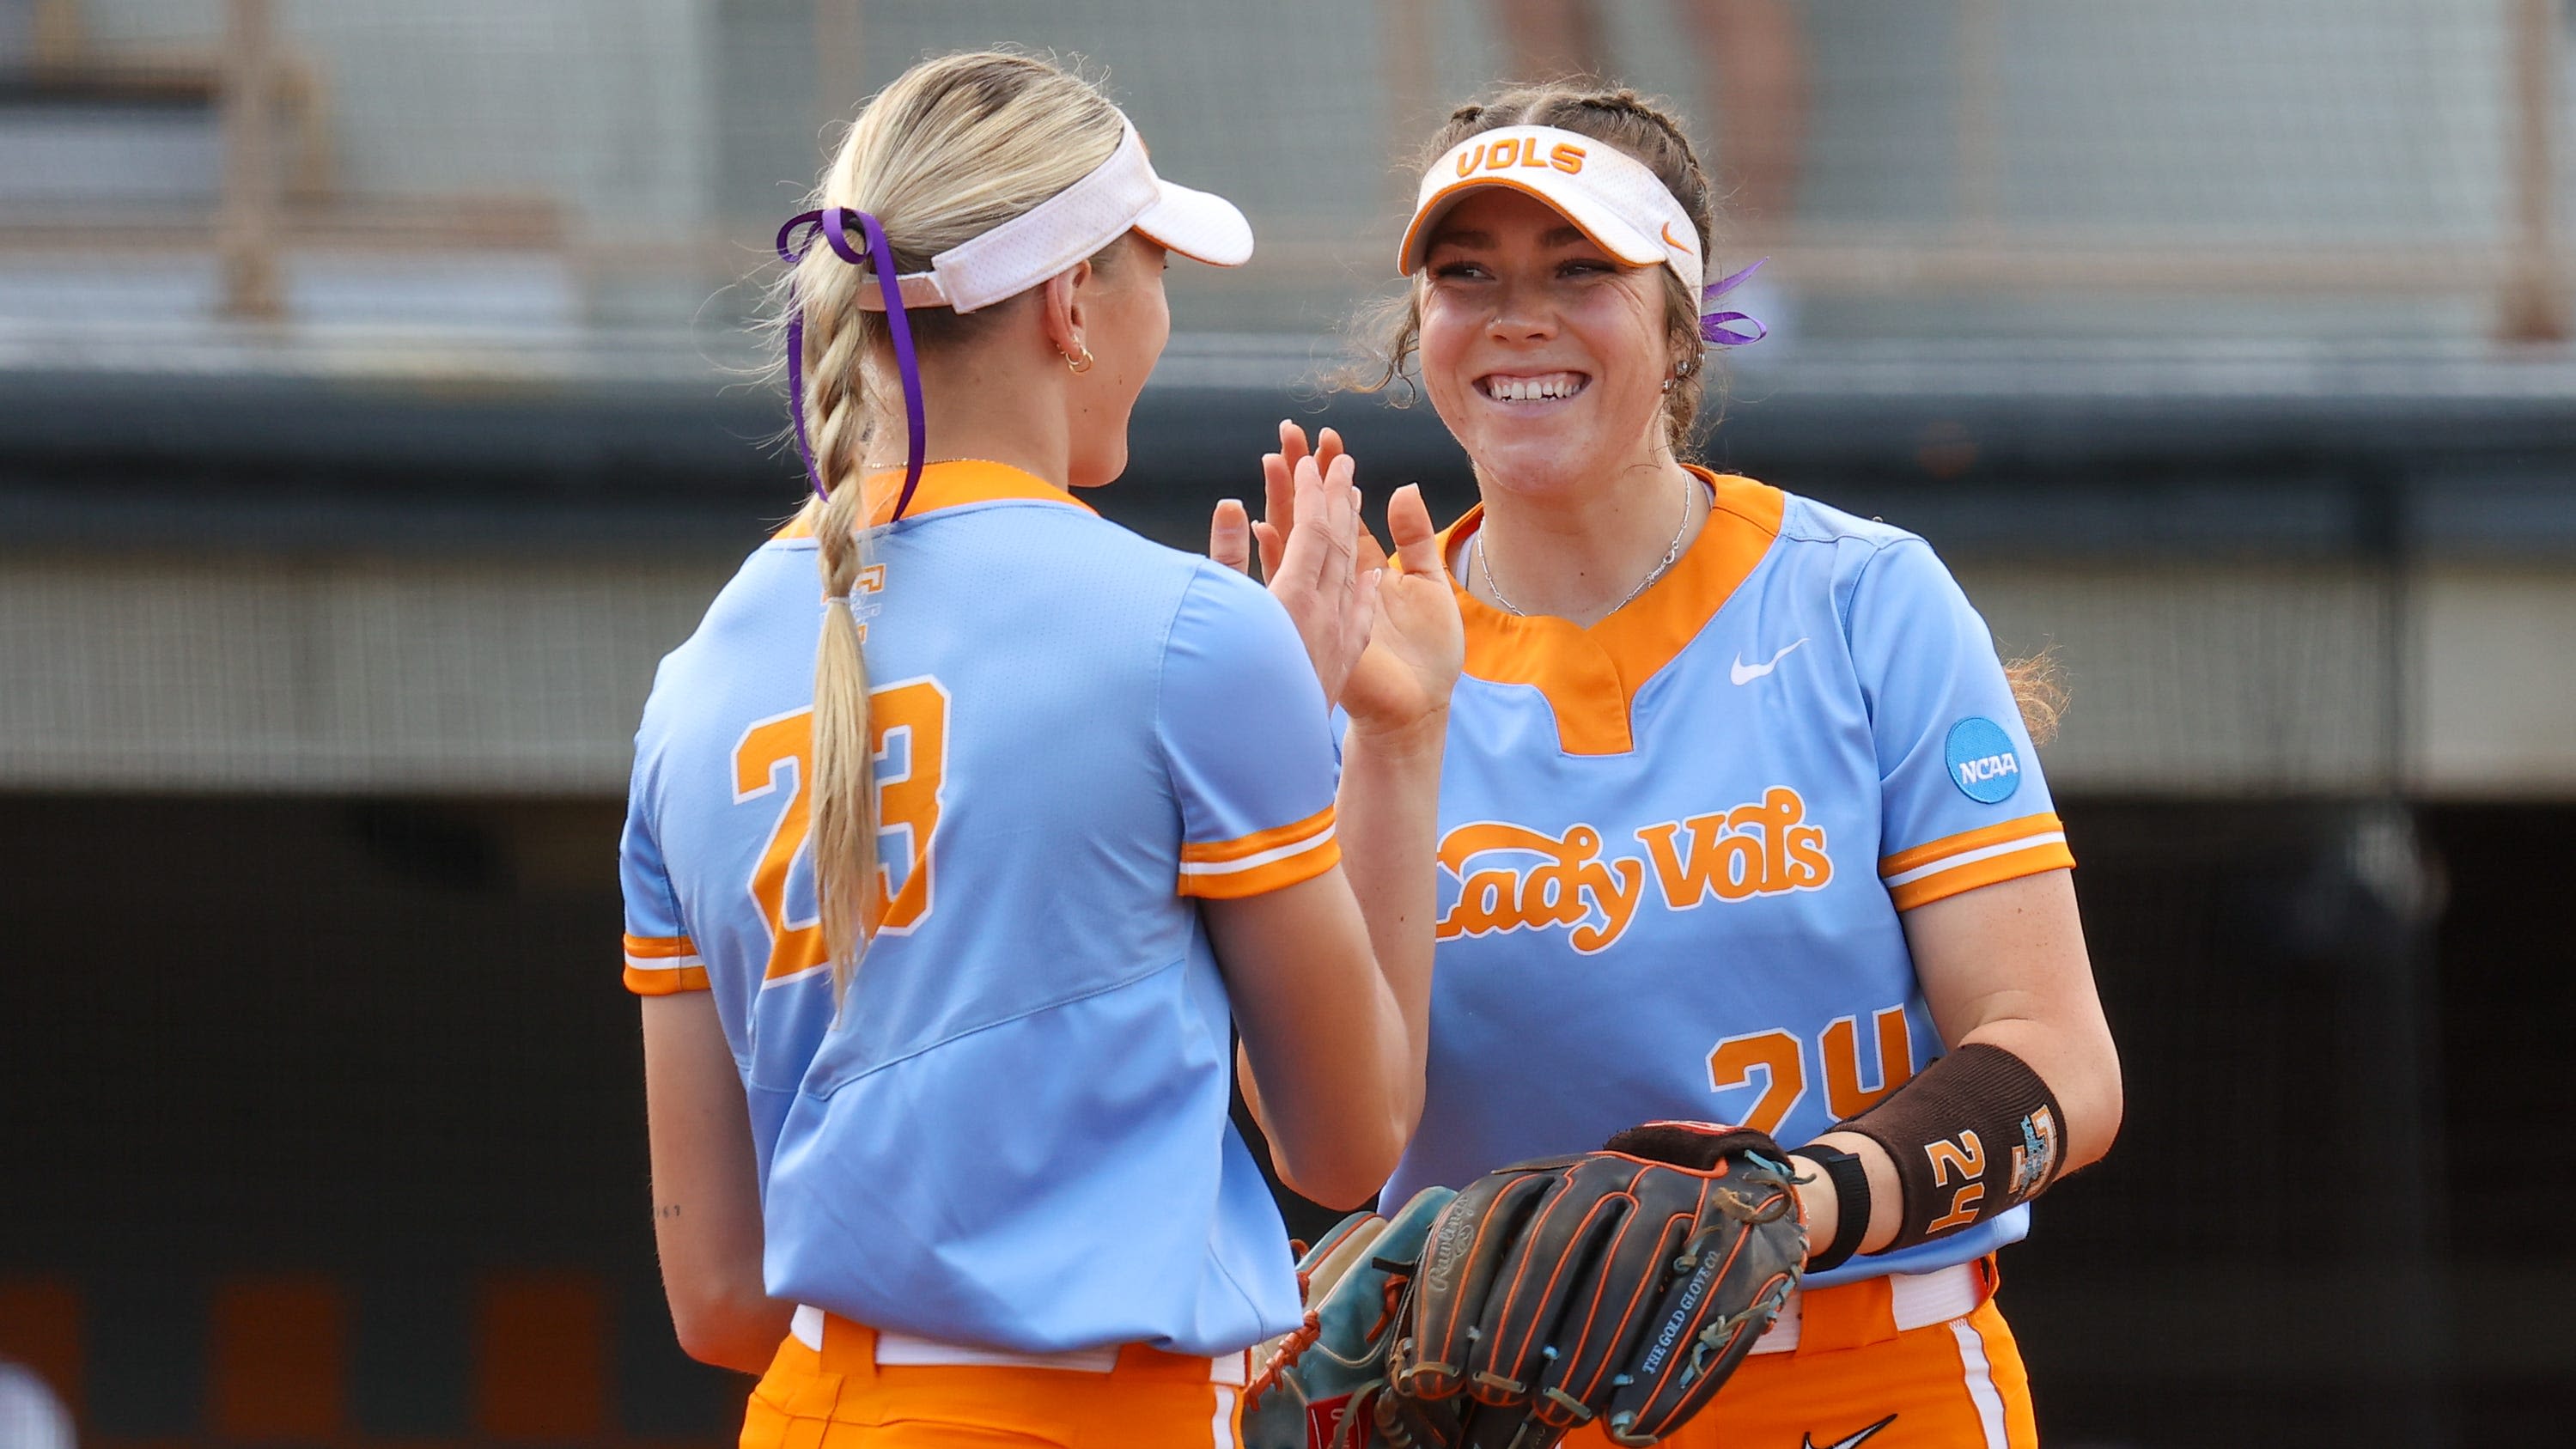 Karen Weekly says Tennessee softball has pitching staff for national championship run